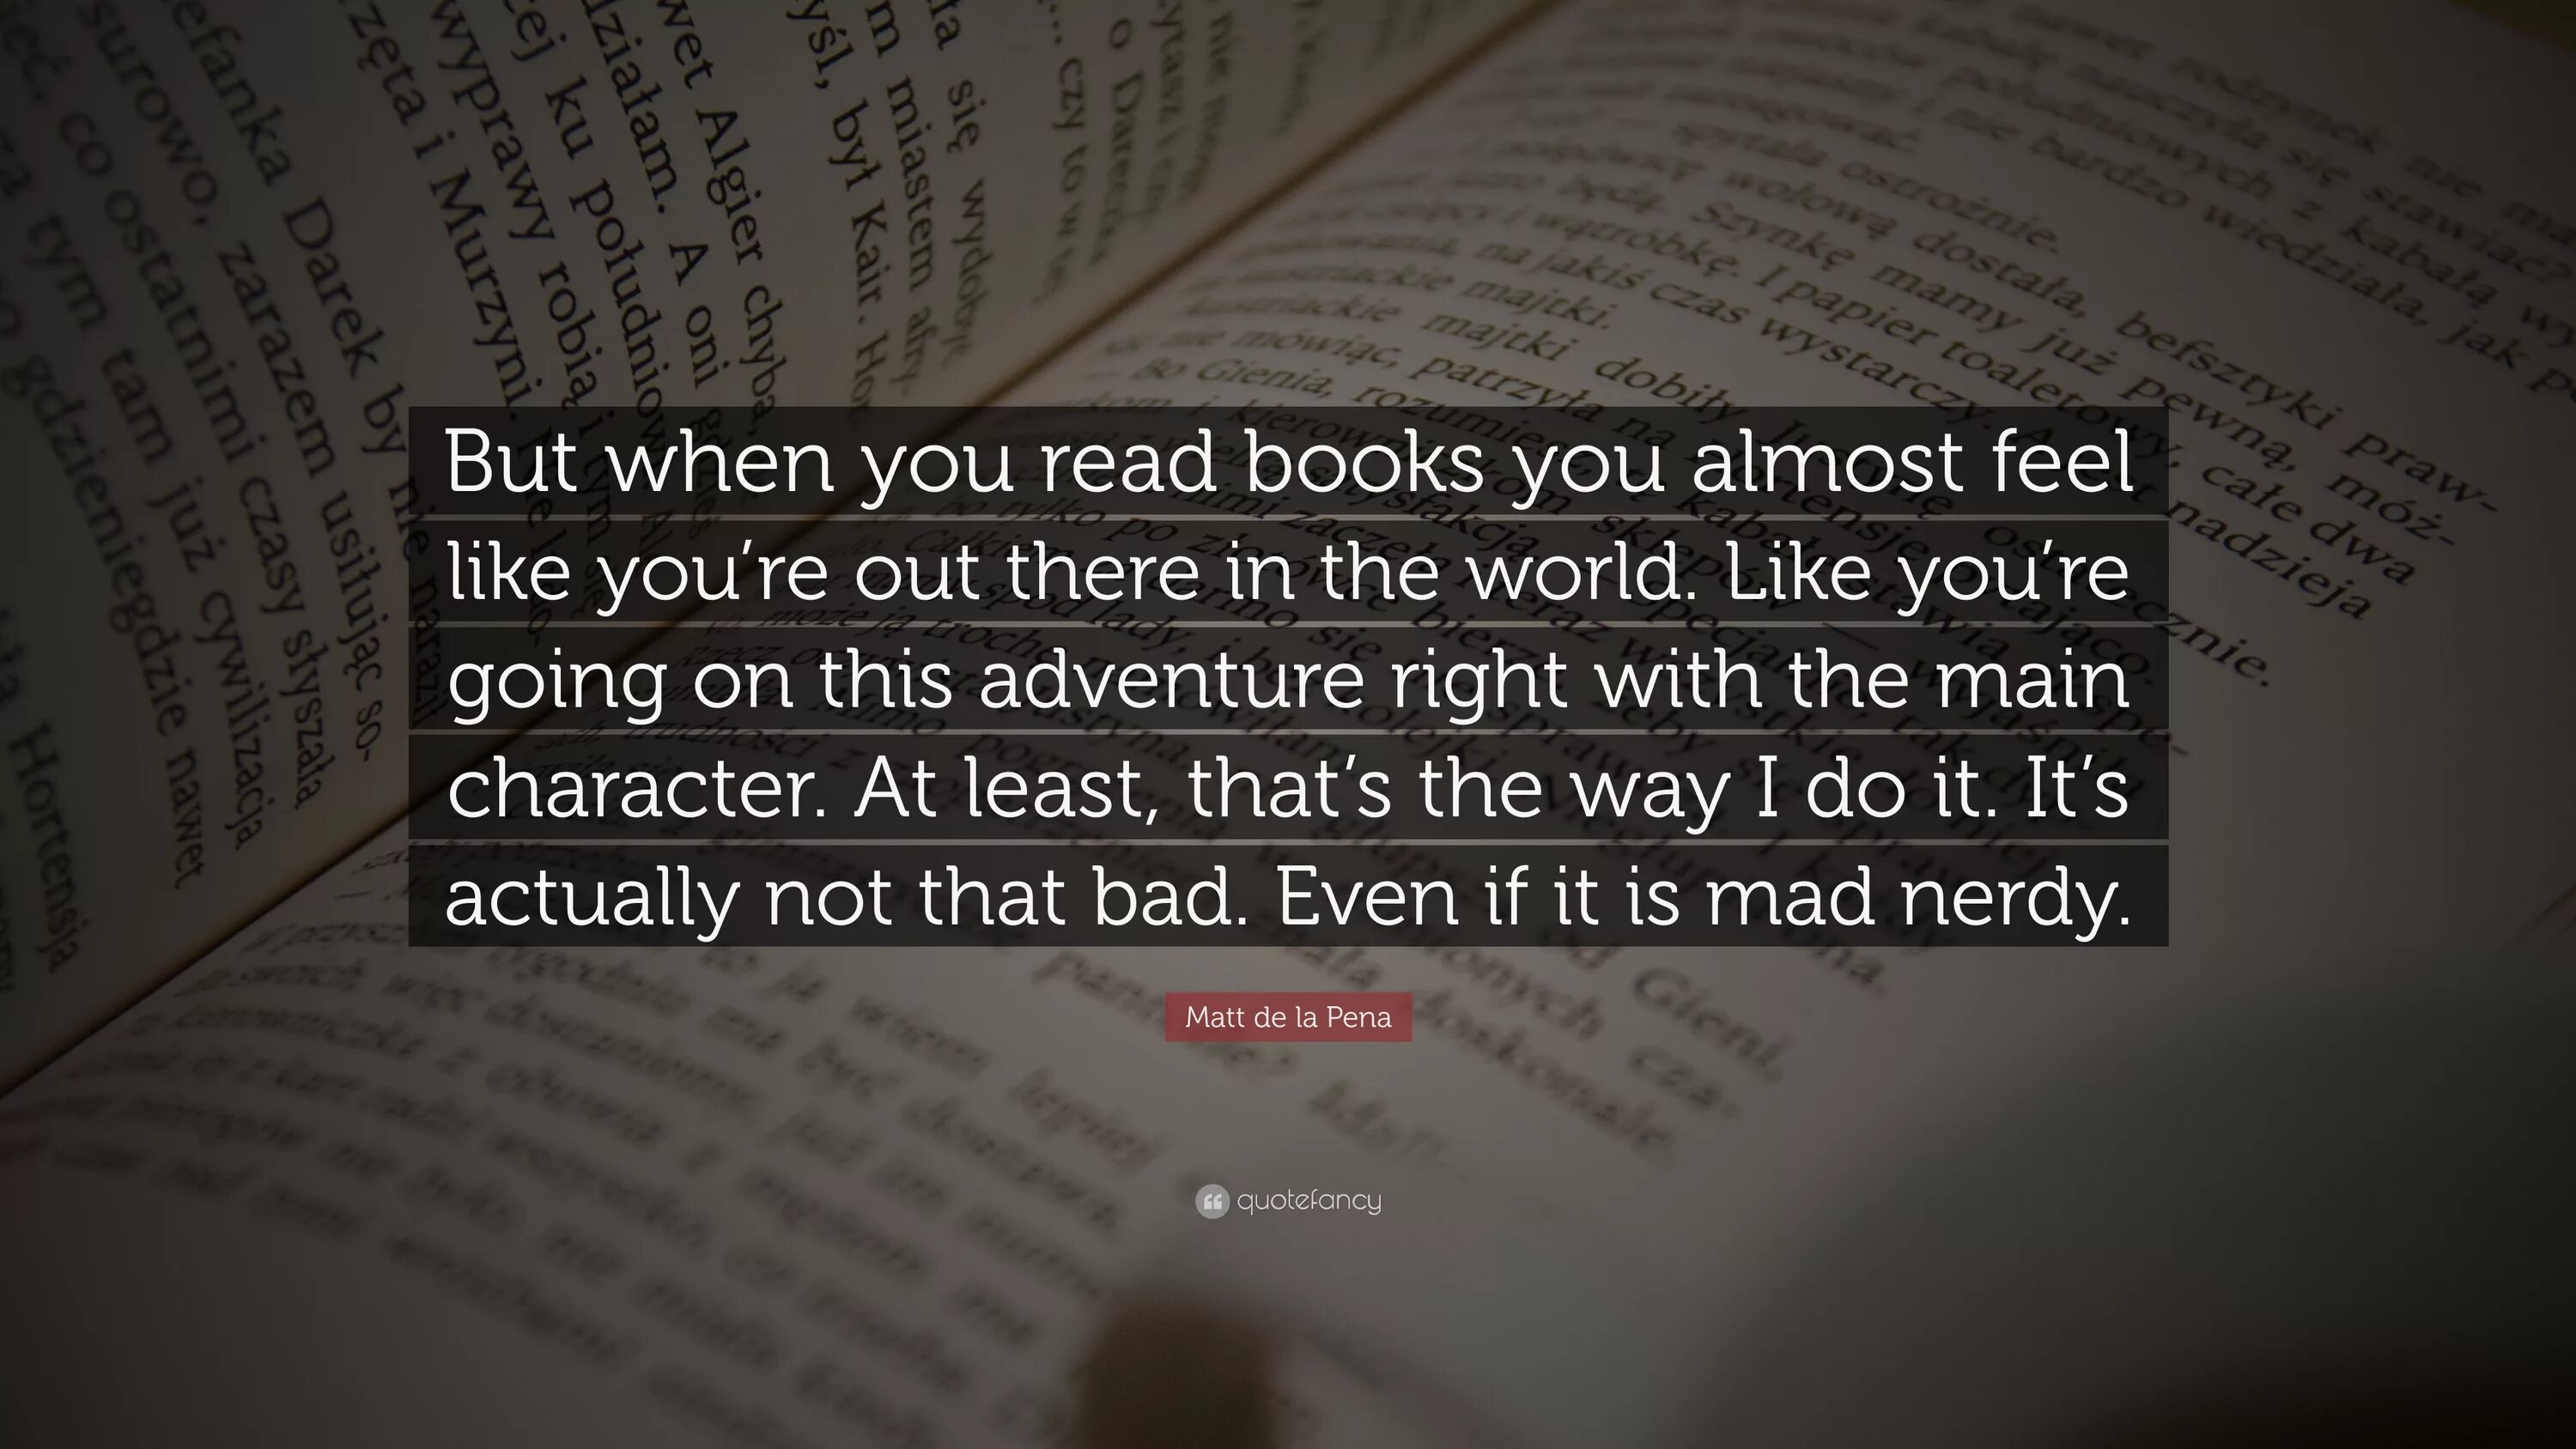 Take book you like. I never liked you книга. Richard Benson's quotes. Educate yourself quote. When books read you.